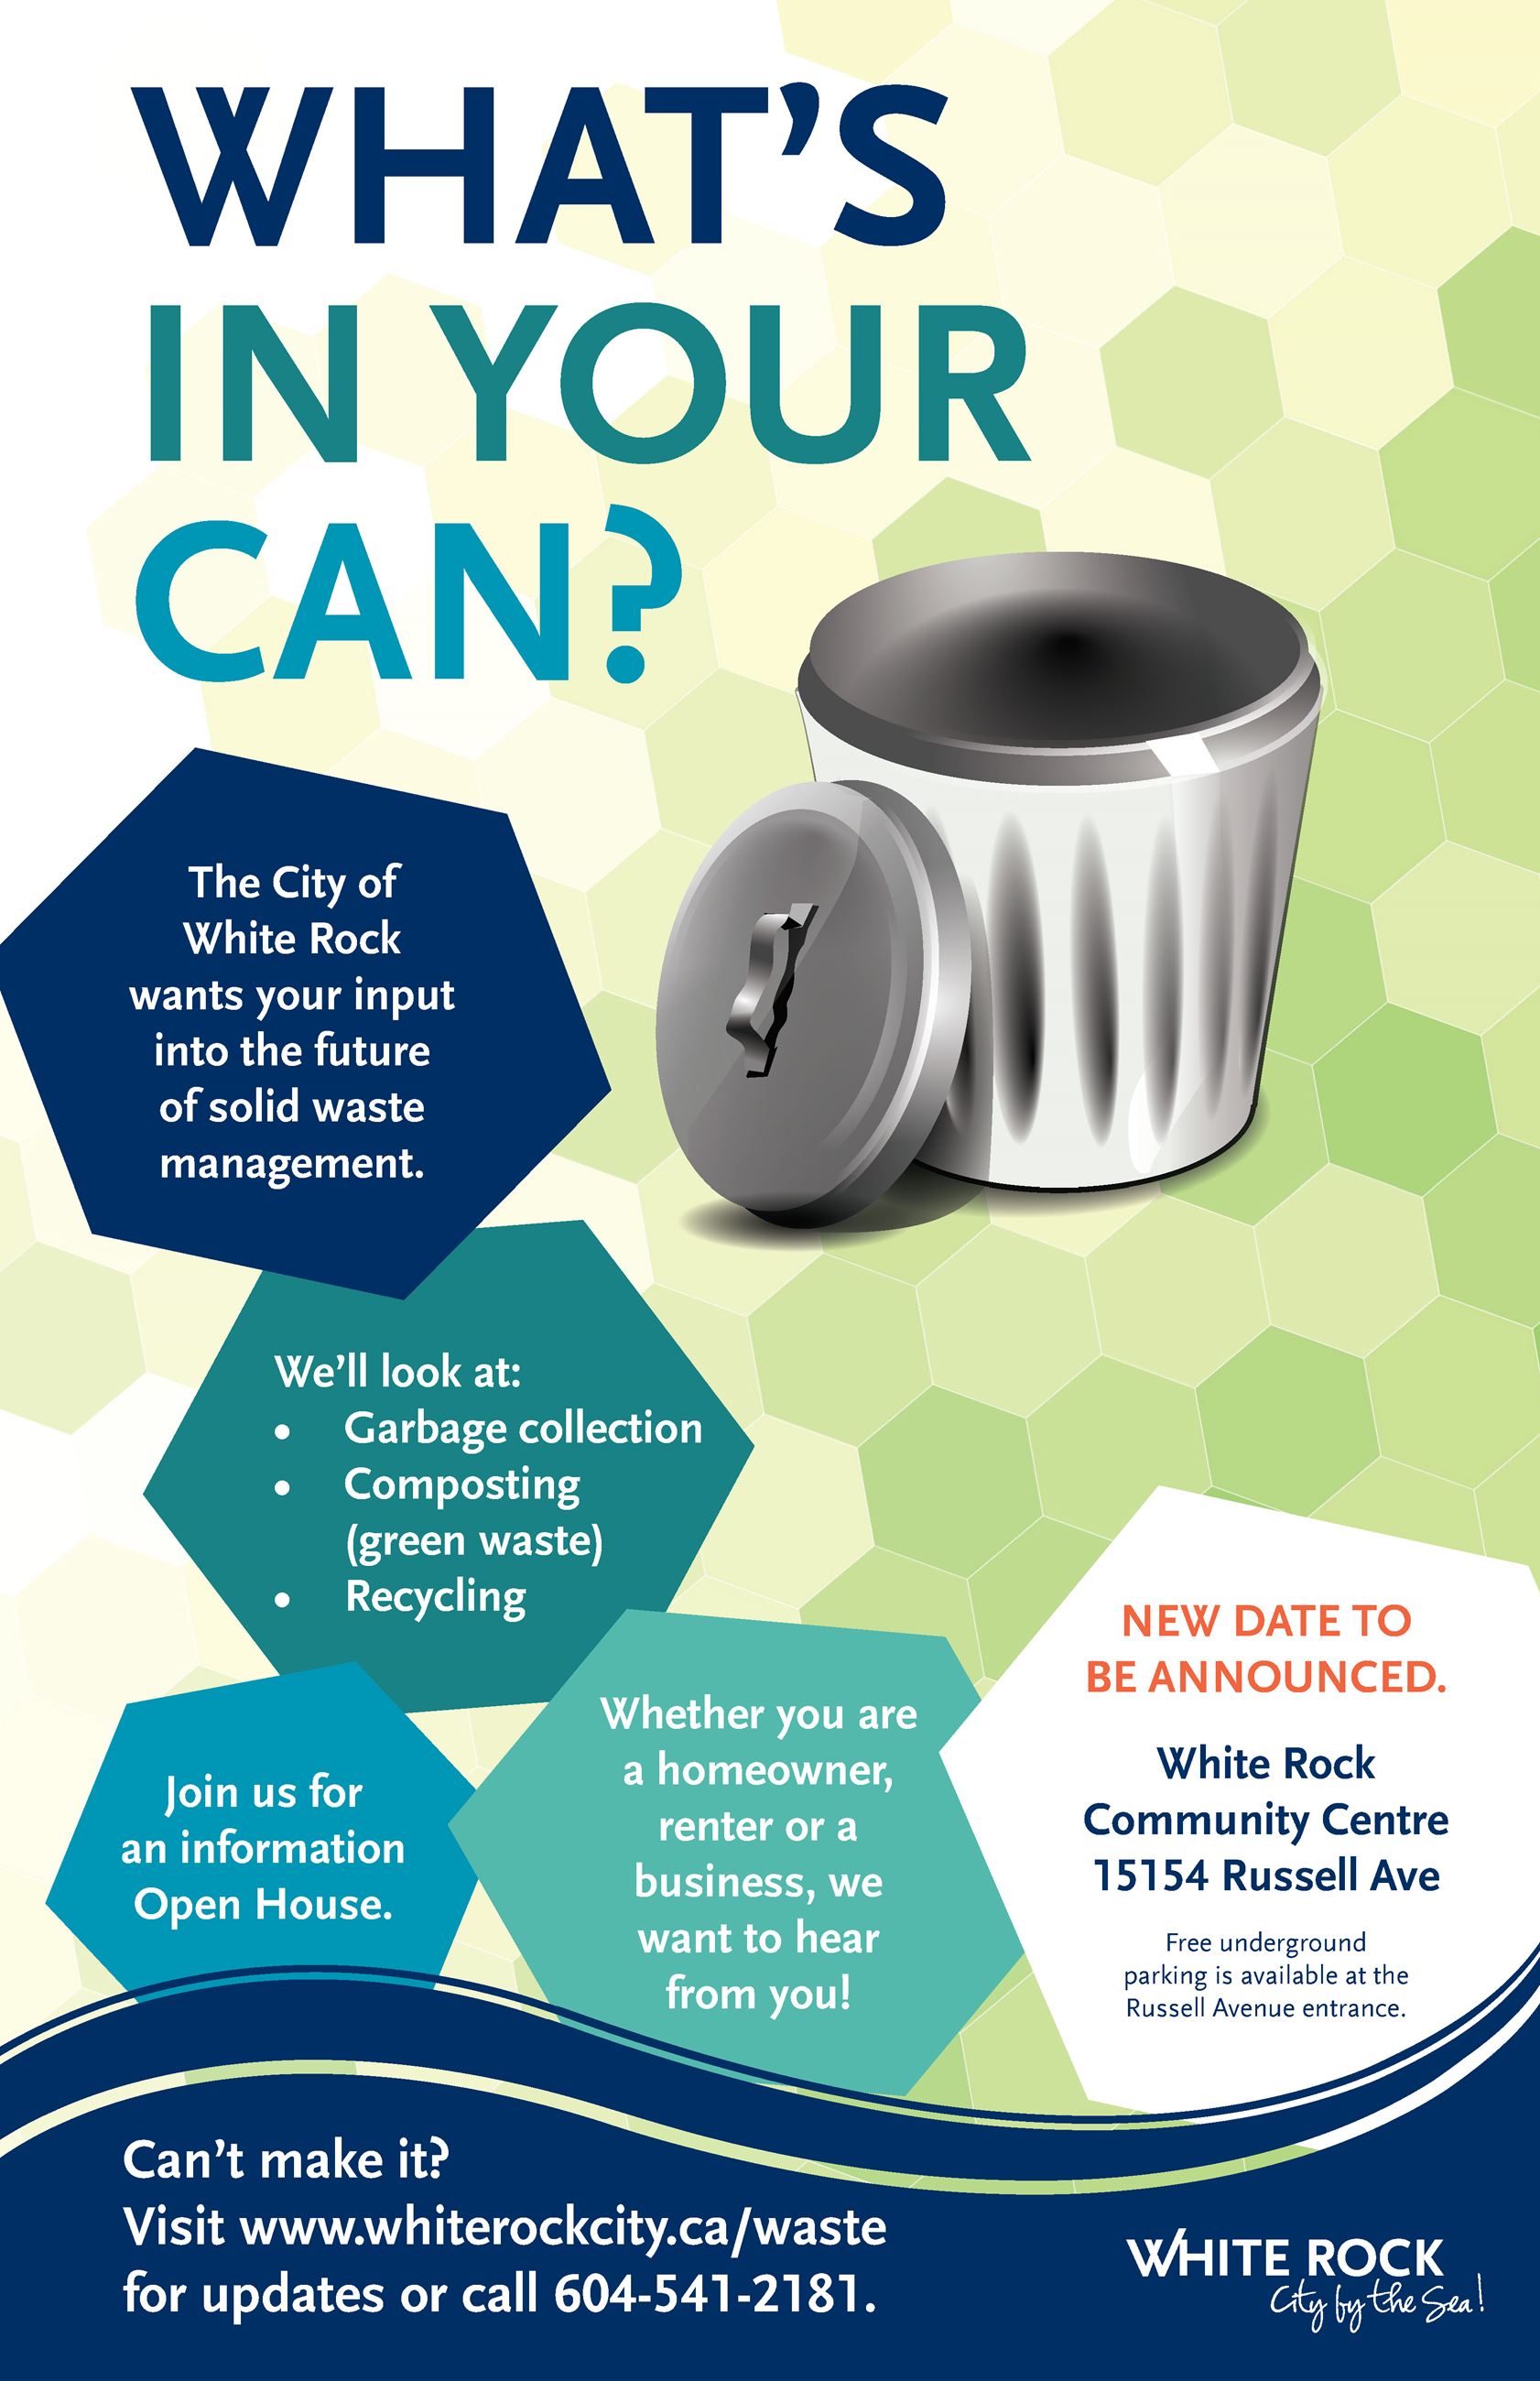 Whats in your can poster - new date